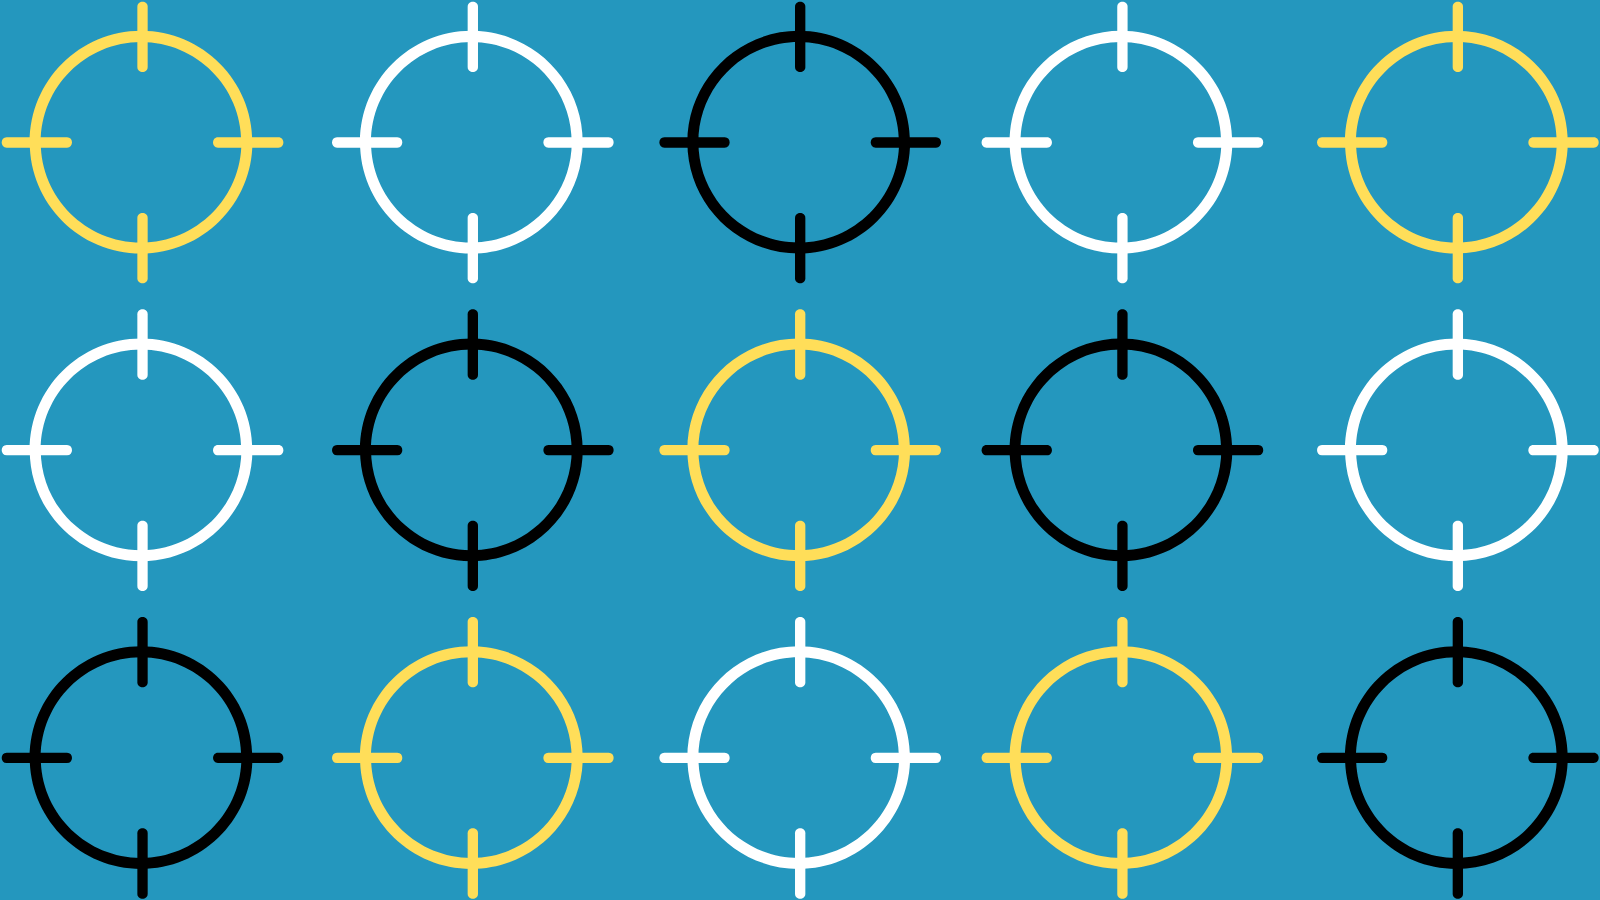 The shooting target symbol in a repeating pattern